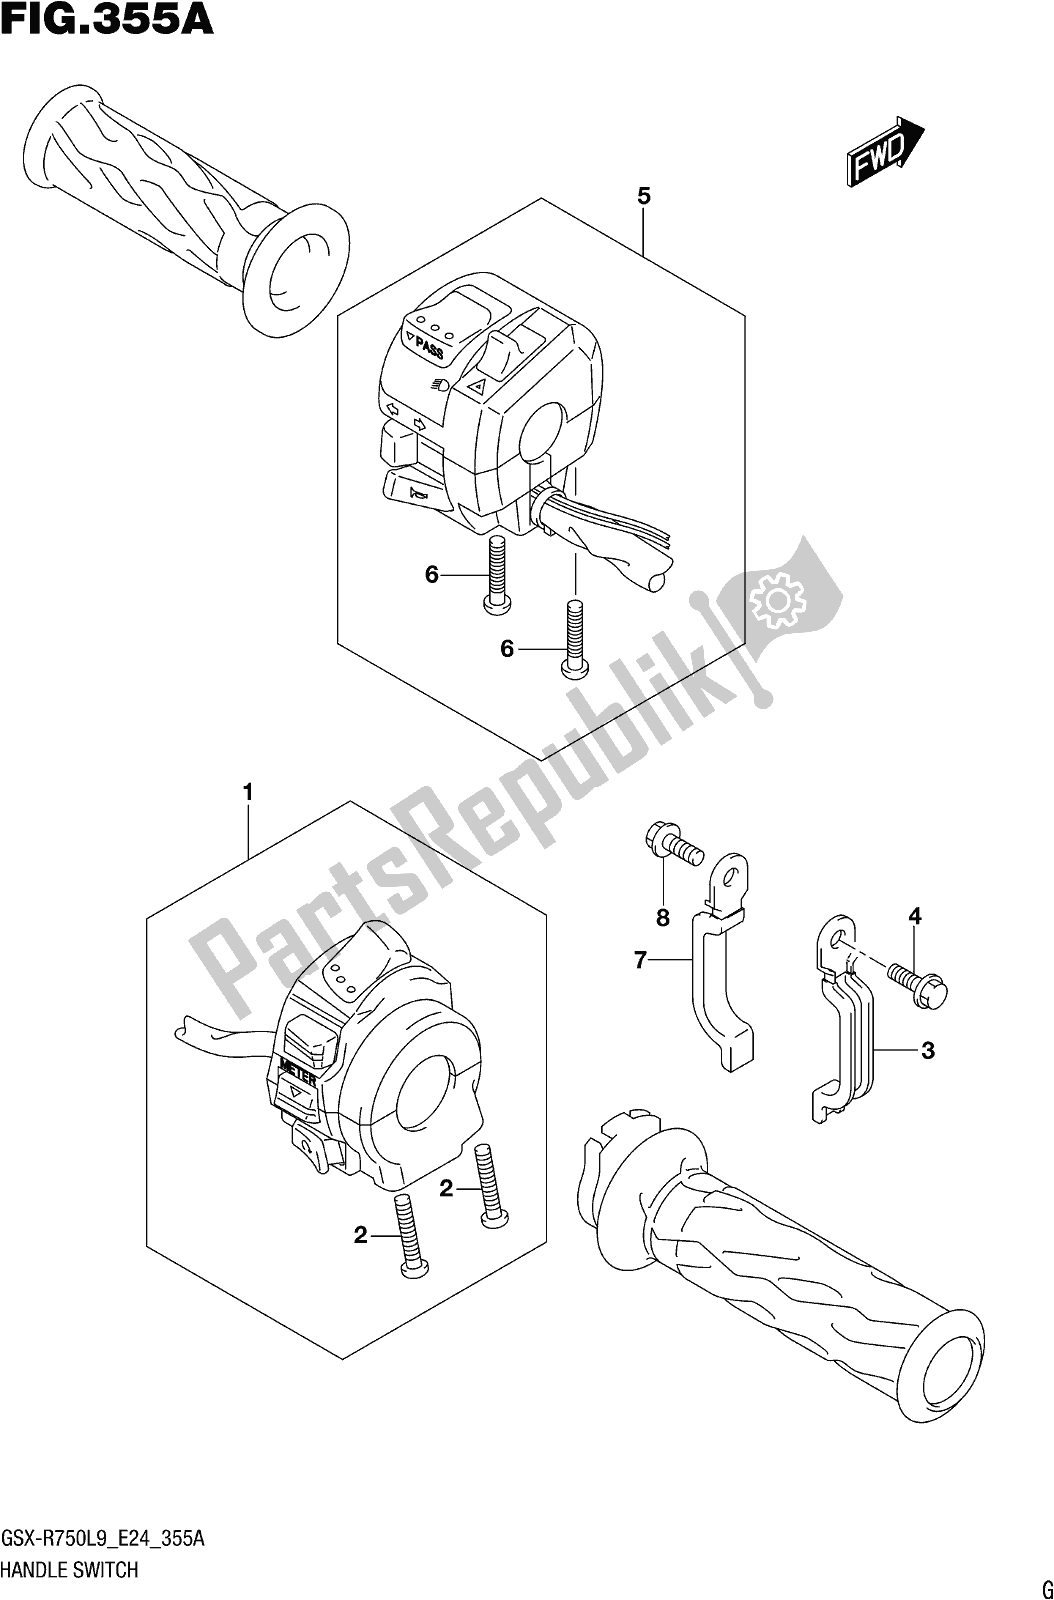 All parts for the Fig. 355a Handle Switch of the Suzuki Gsx-r 750 2019